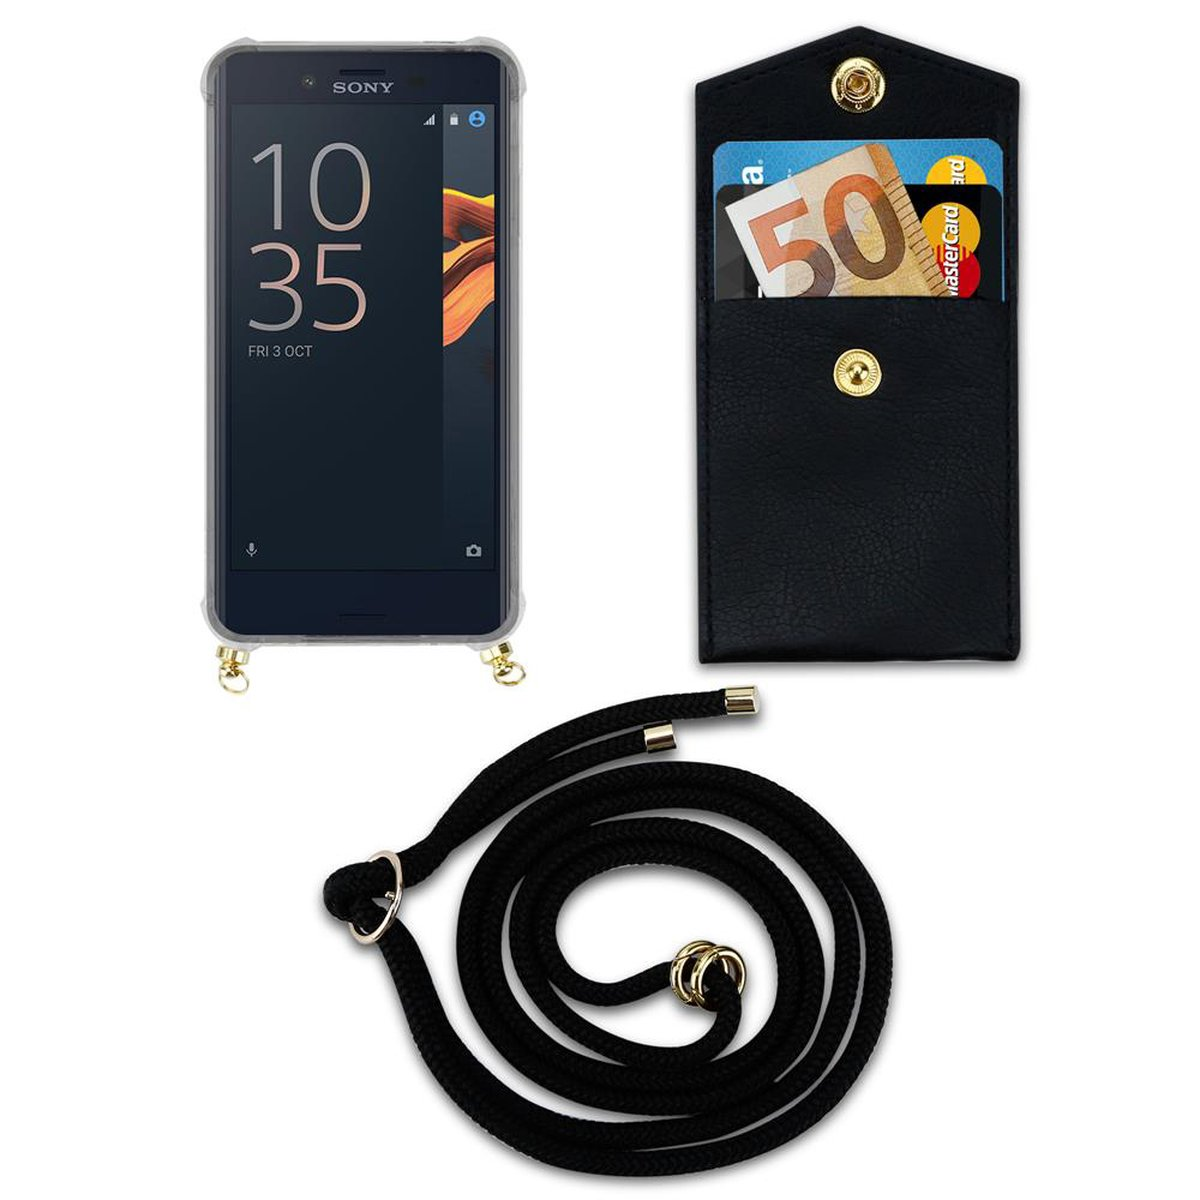 Handy Kette X SCHWARZ mit Ringen, abnehmbarer Xperia Band COMPACT, Backcover, Gold CADORABO Sony, Hülle, und Kordel